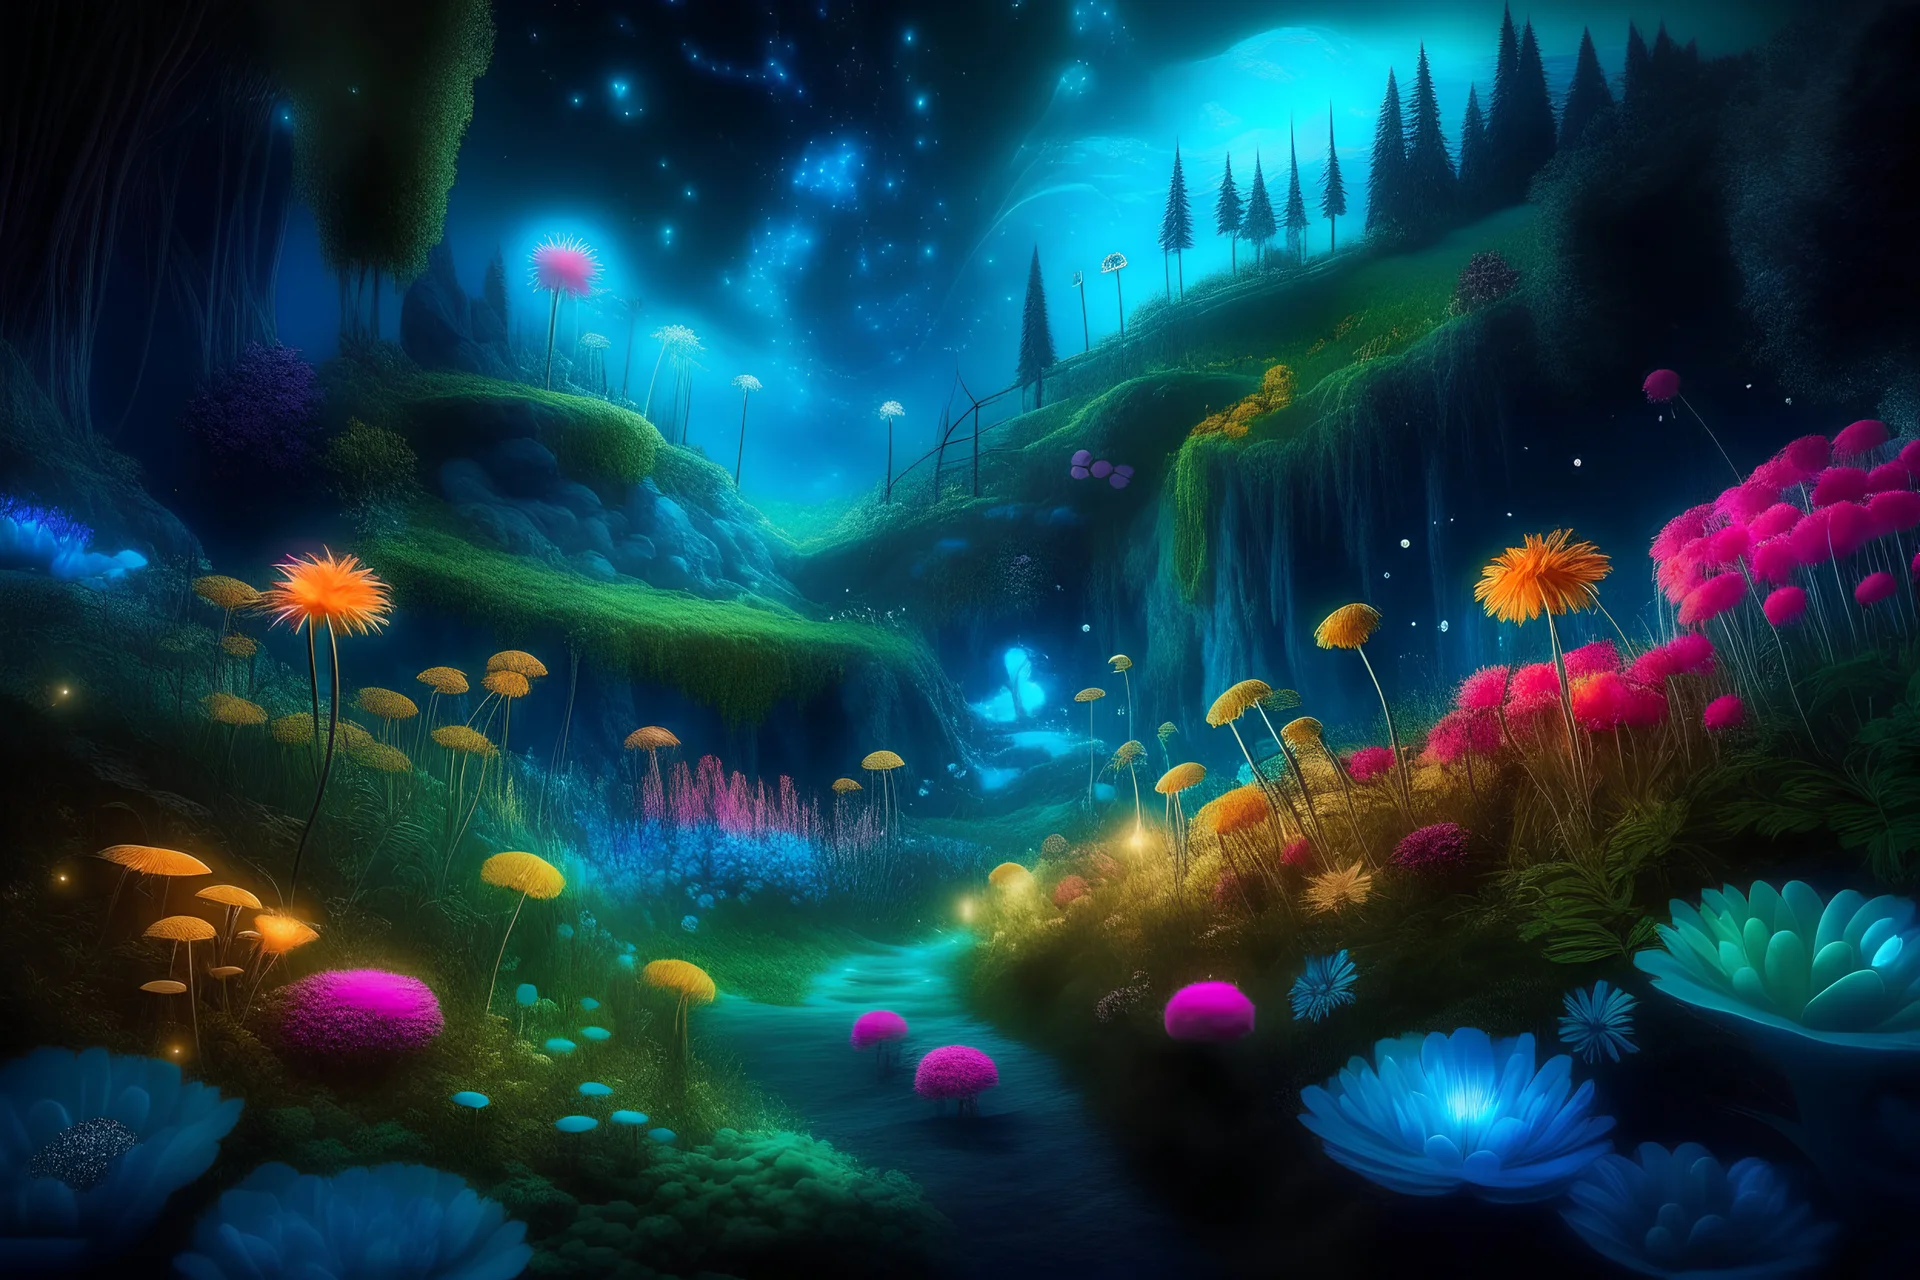 Landscape in a magical place with neon flowers and tiny fairies all in photography art